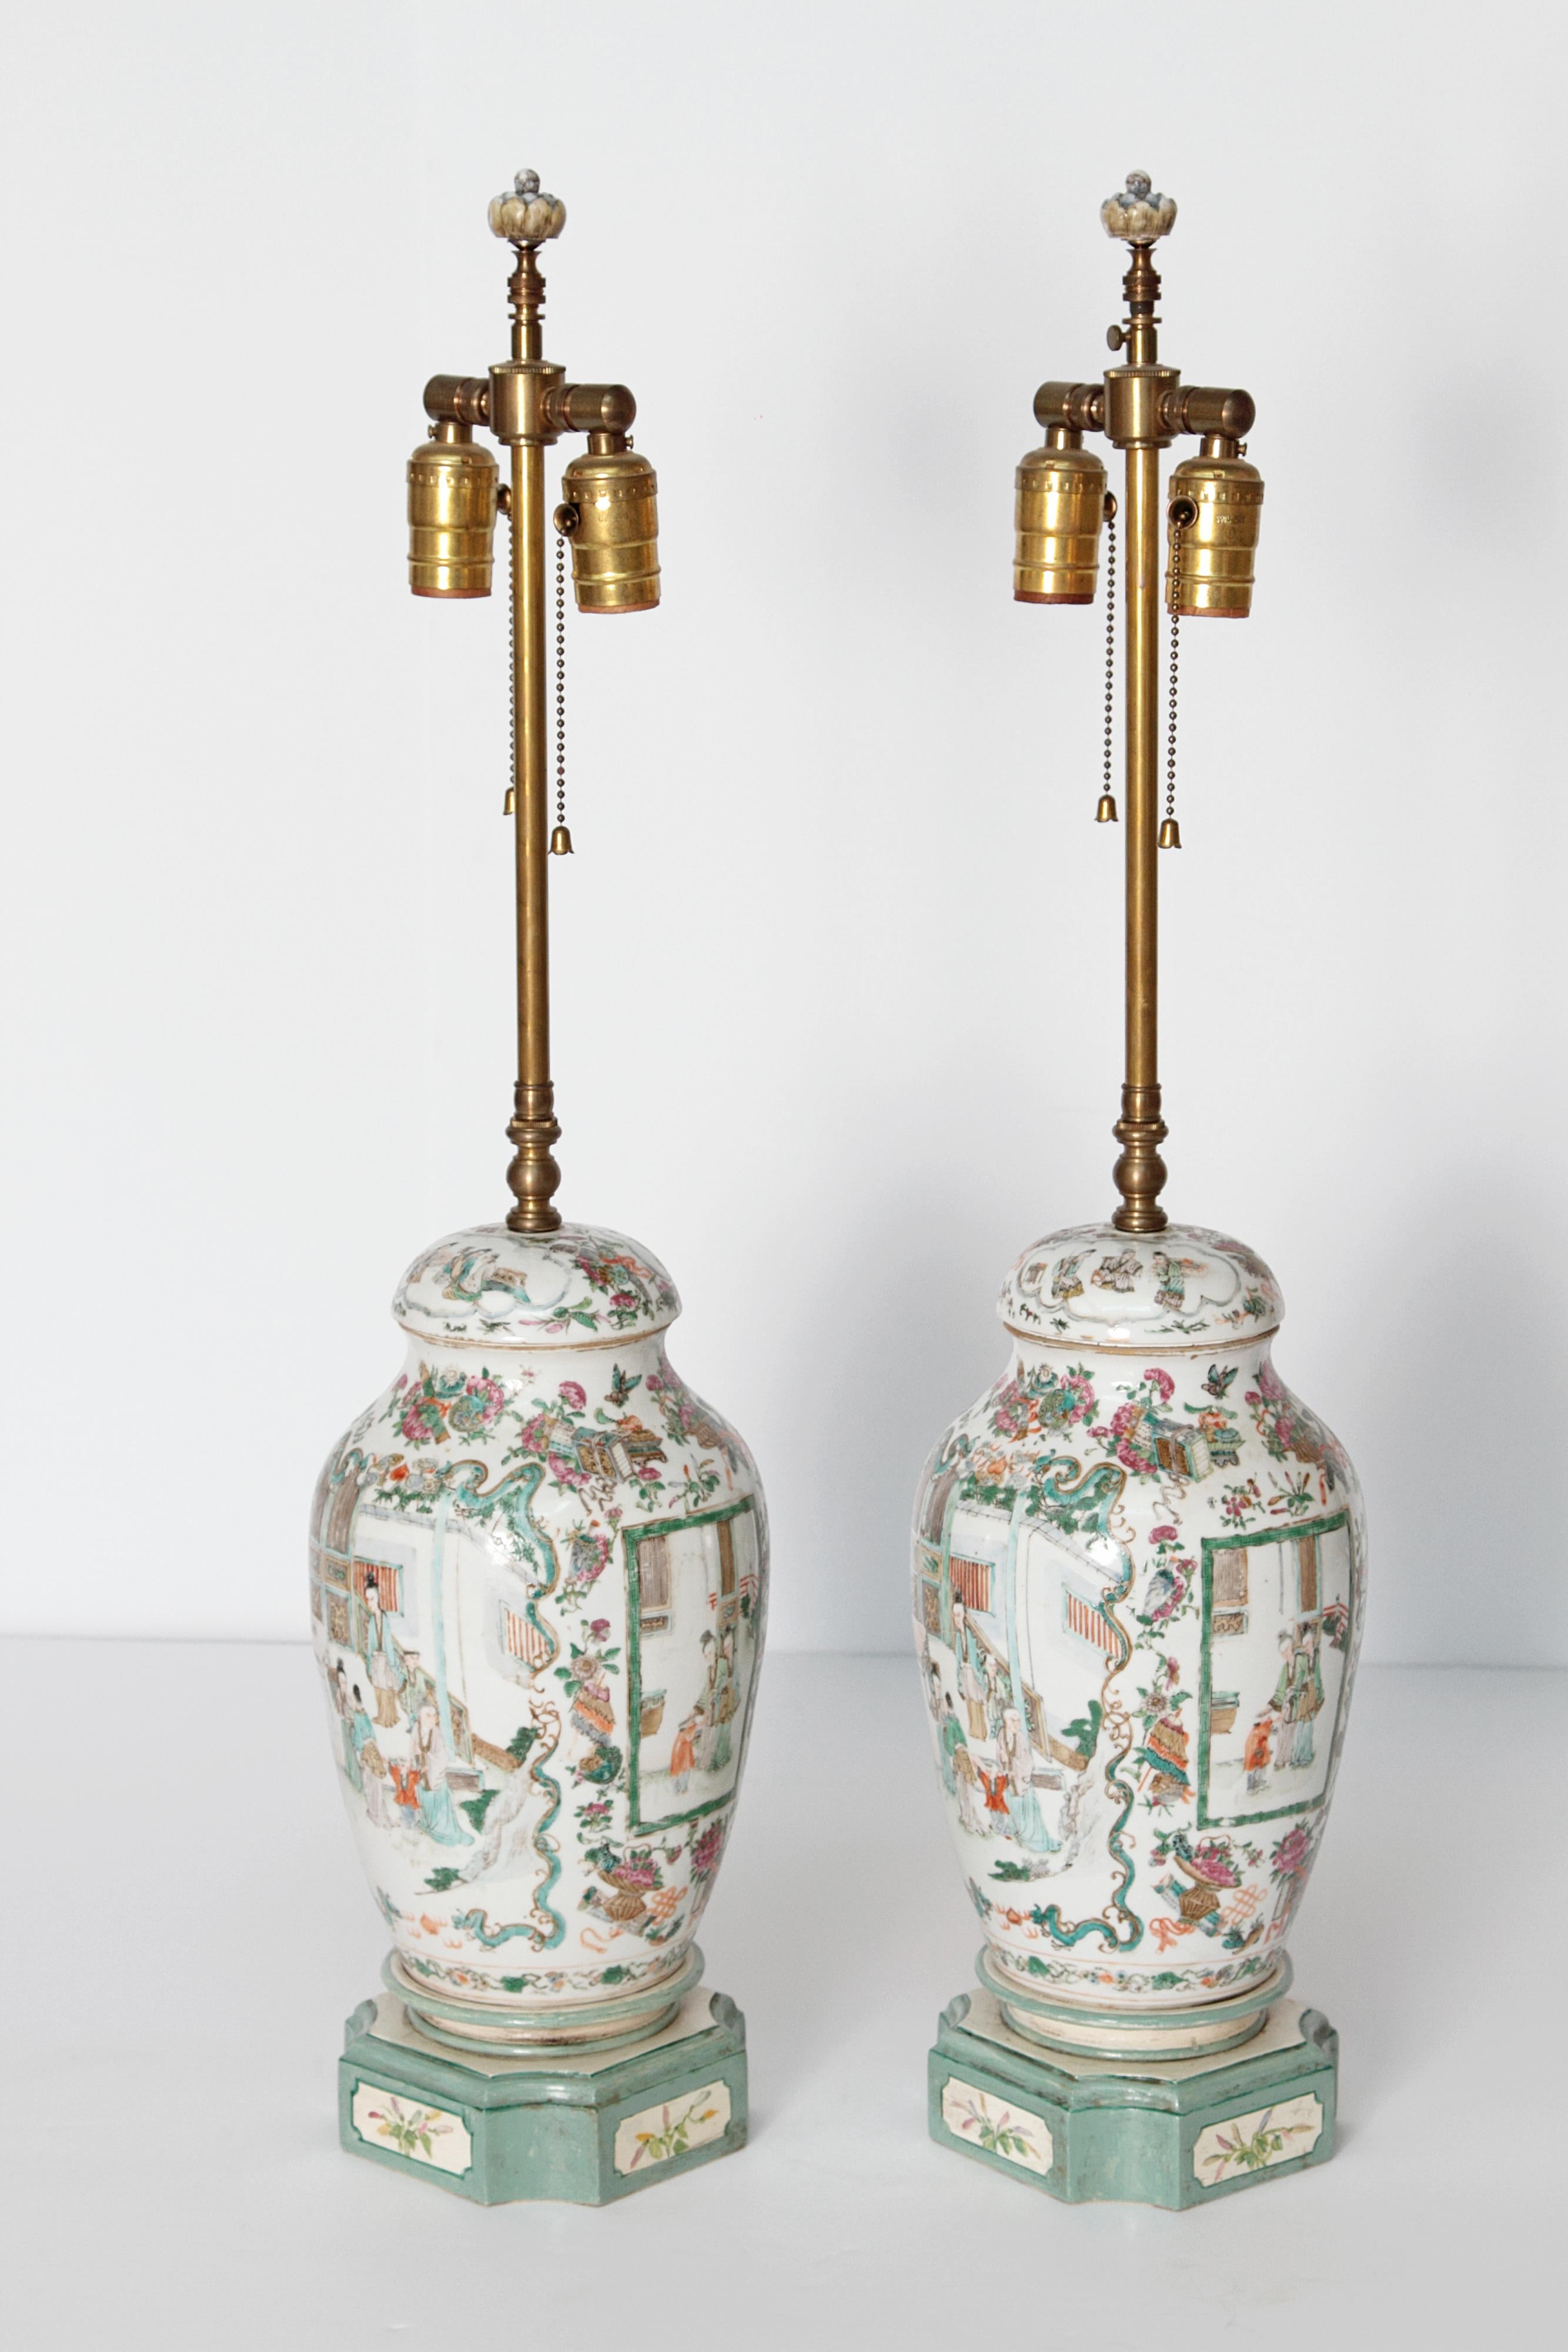 Hand-Painted Pair of Early 19th Century Chinese Porcelain Lidded Jars as Lamps